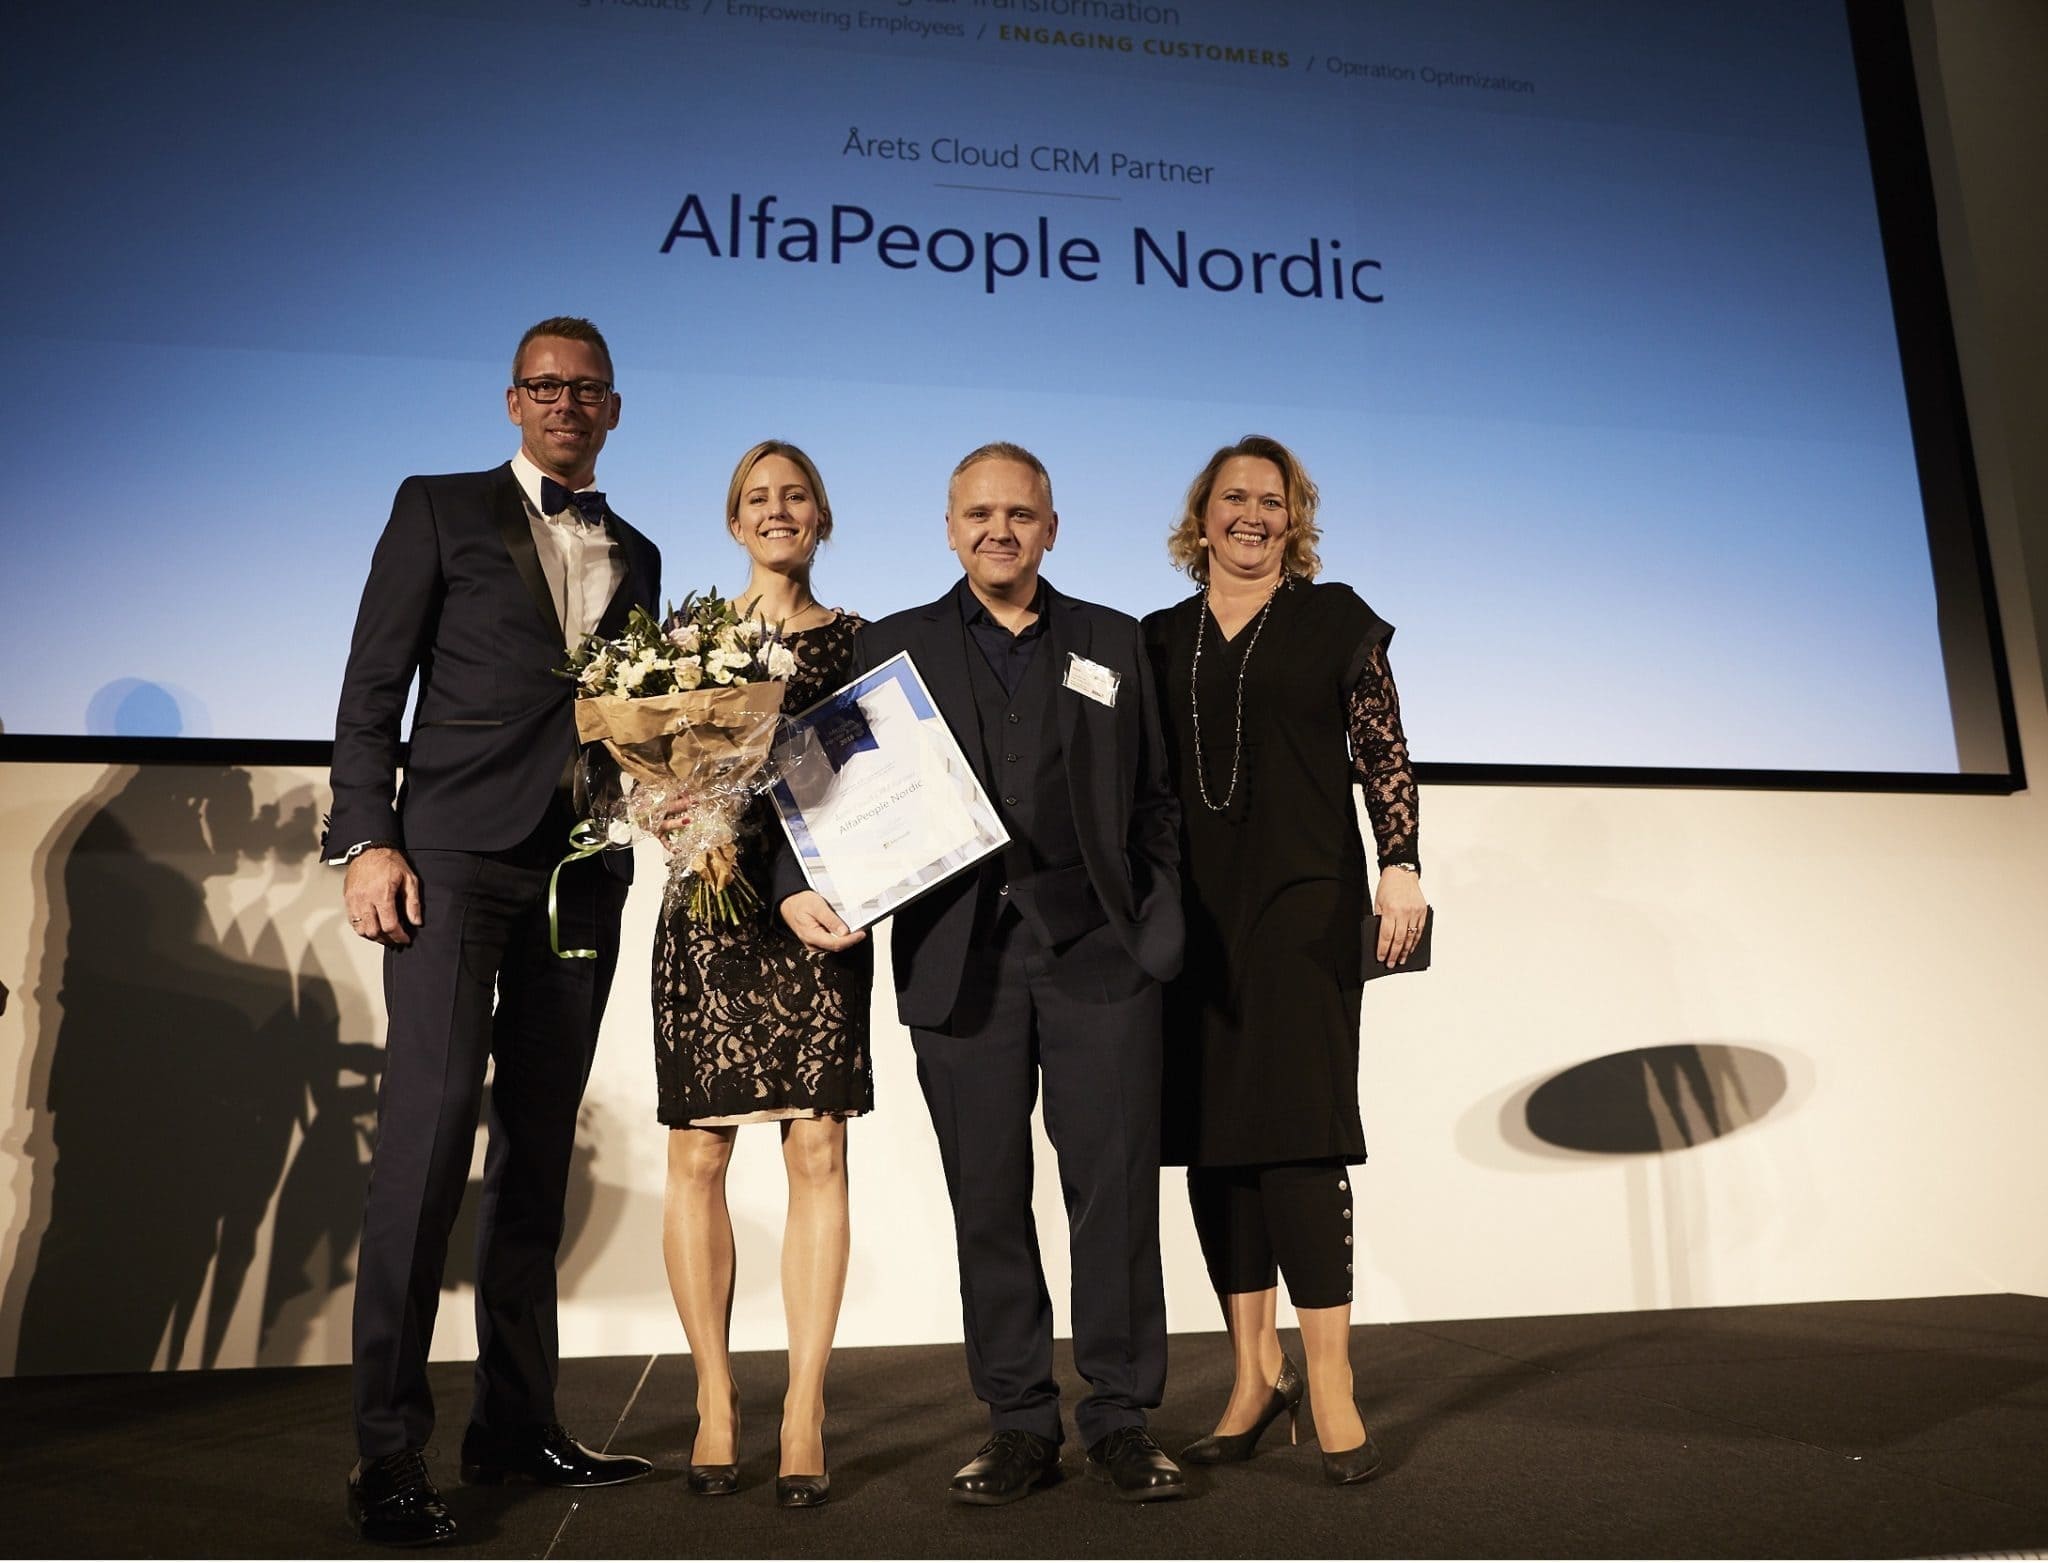 AlfaPeople awarded two nominations at Partner of the Year Award 2016 in Denmark